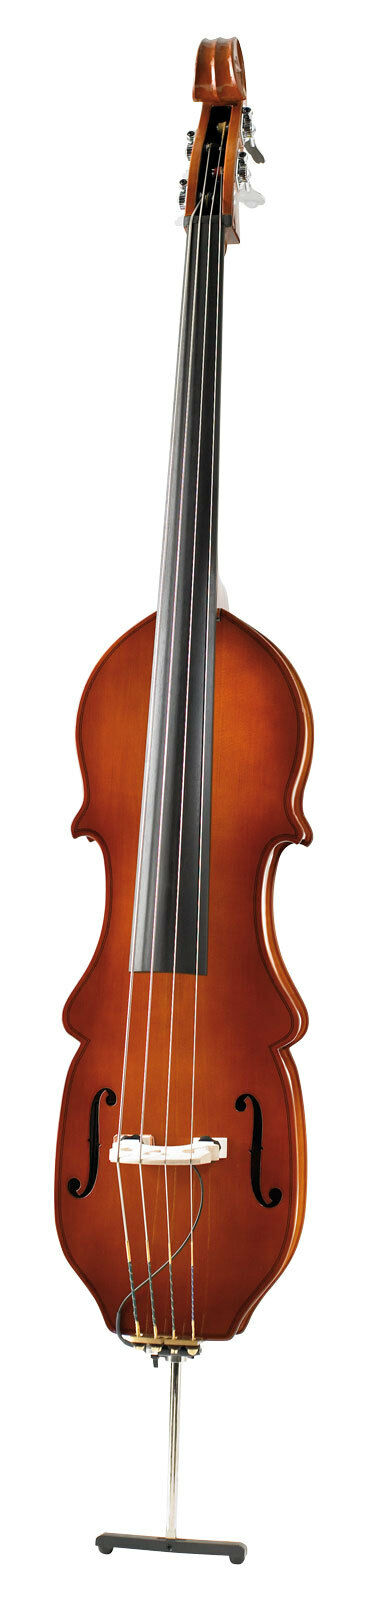 EMINENCE PORTABLE 4-STRING ELECTRIC UPRIGHT BASS